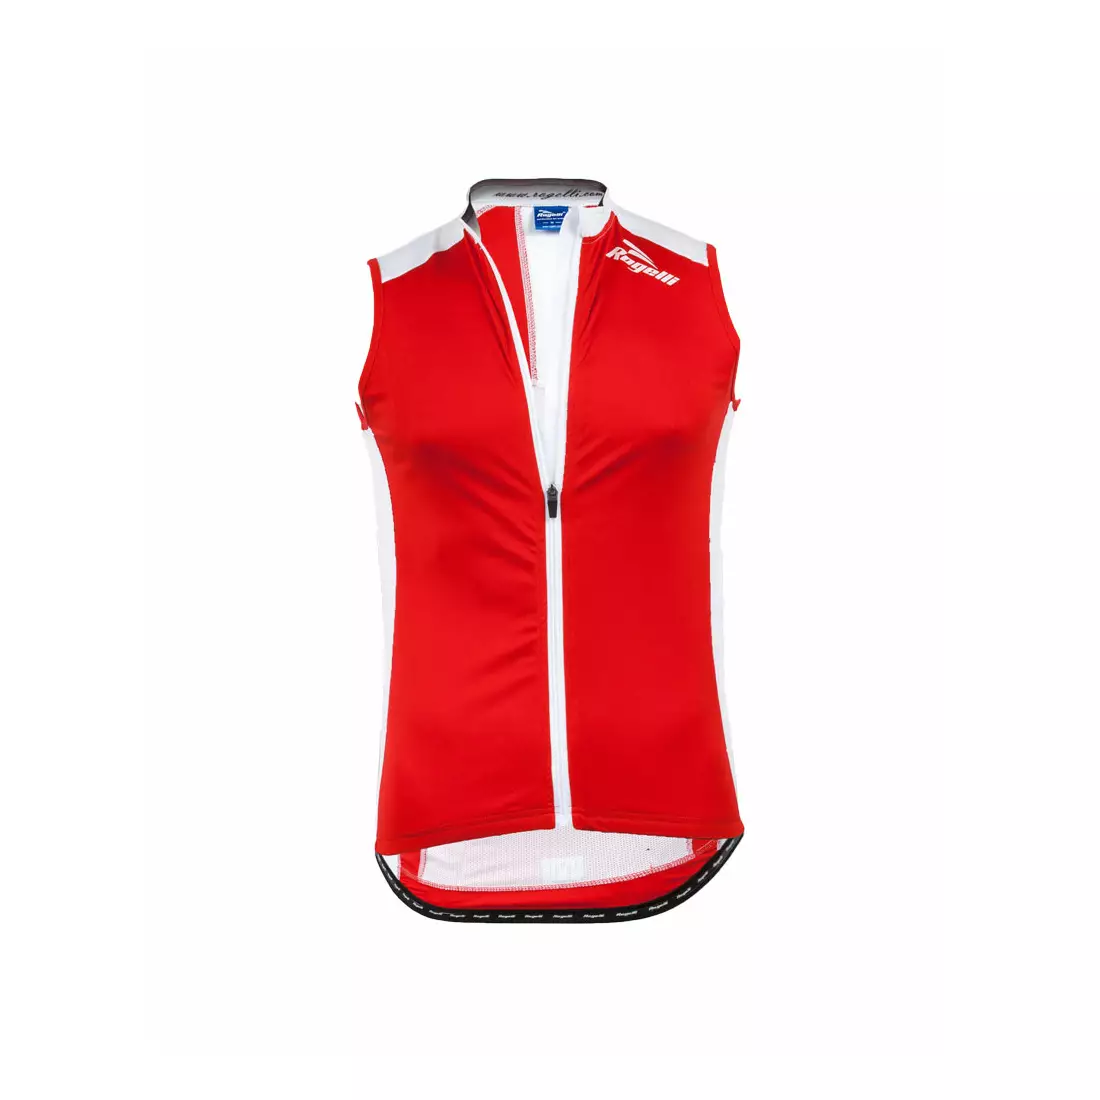 ROGELLI POLINO - men's sleeveless cycling jersey, color: red and white